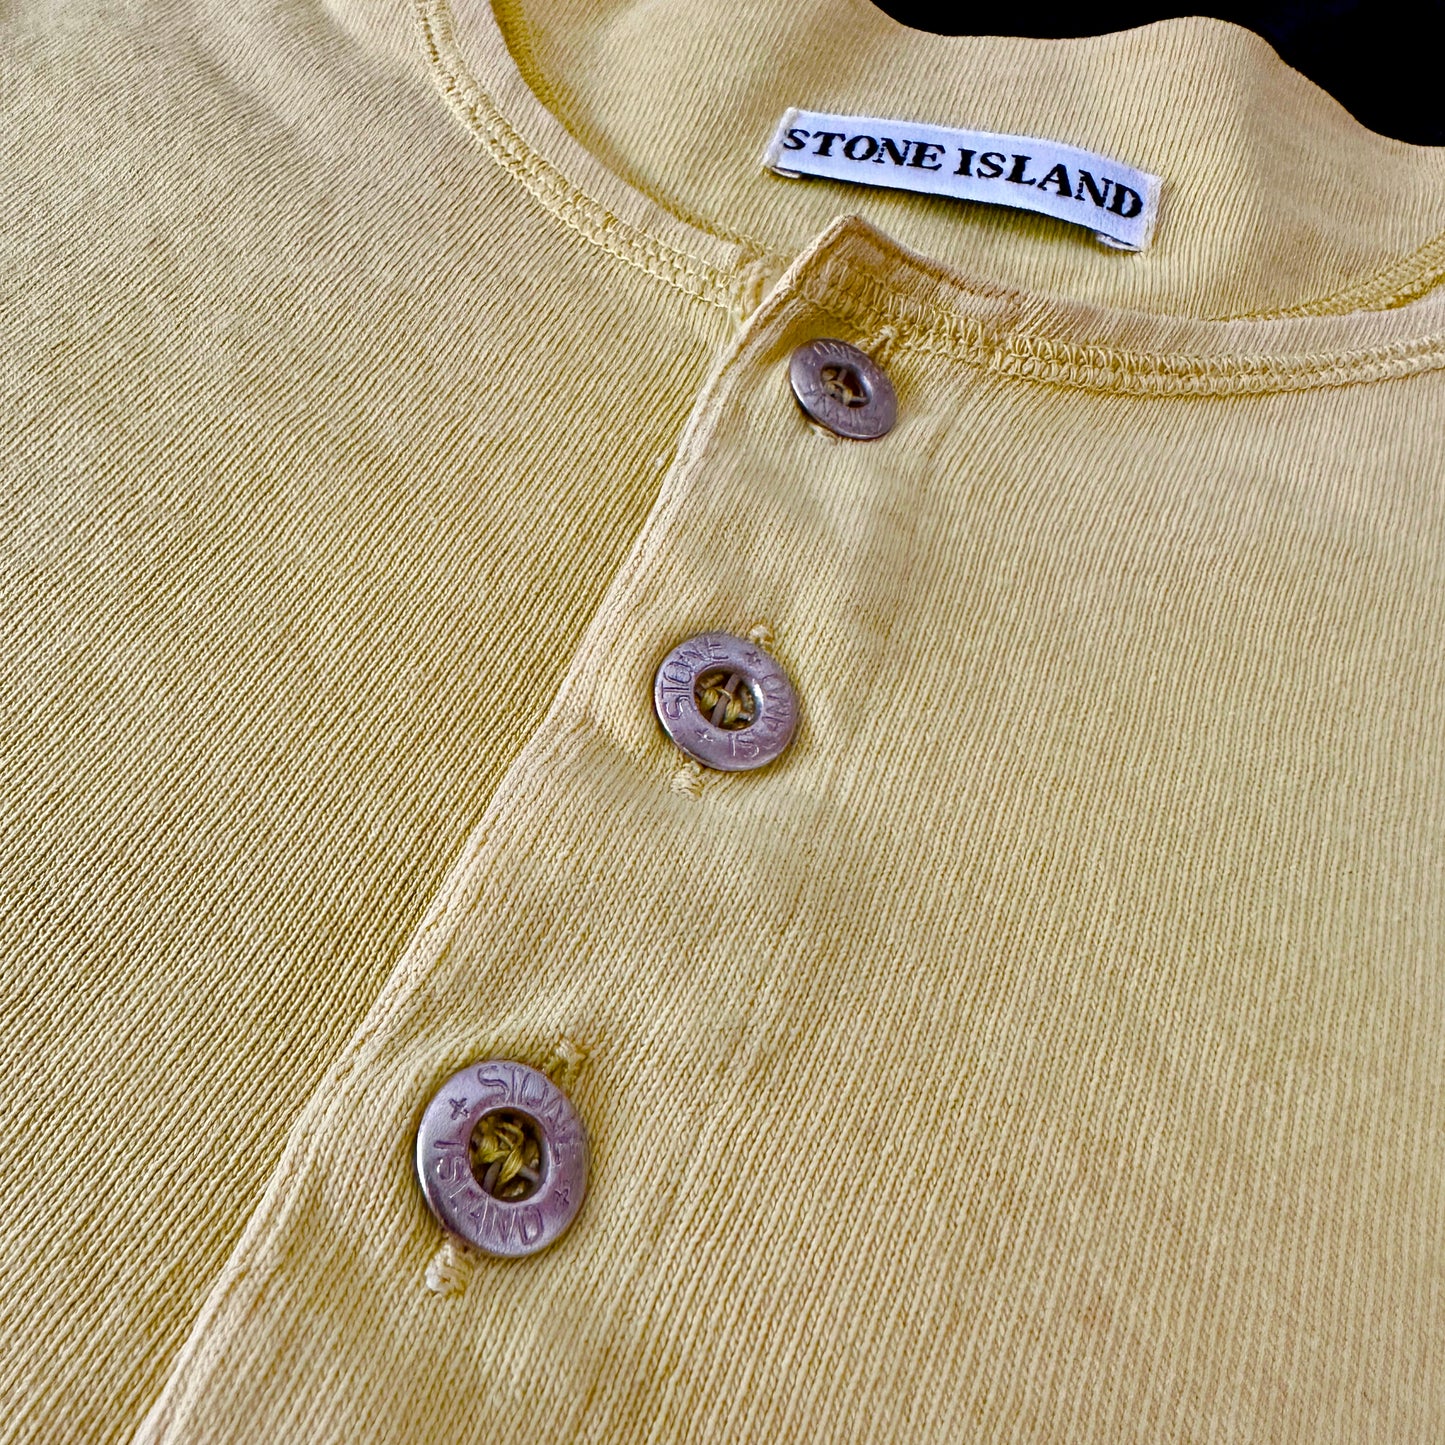 Stone Island Vintage 80s Metal Button Henley T-Shirt - M - Made in Italy